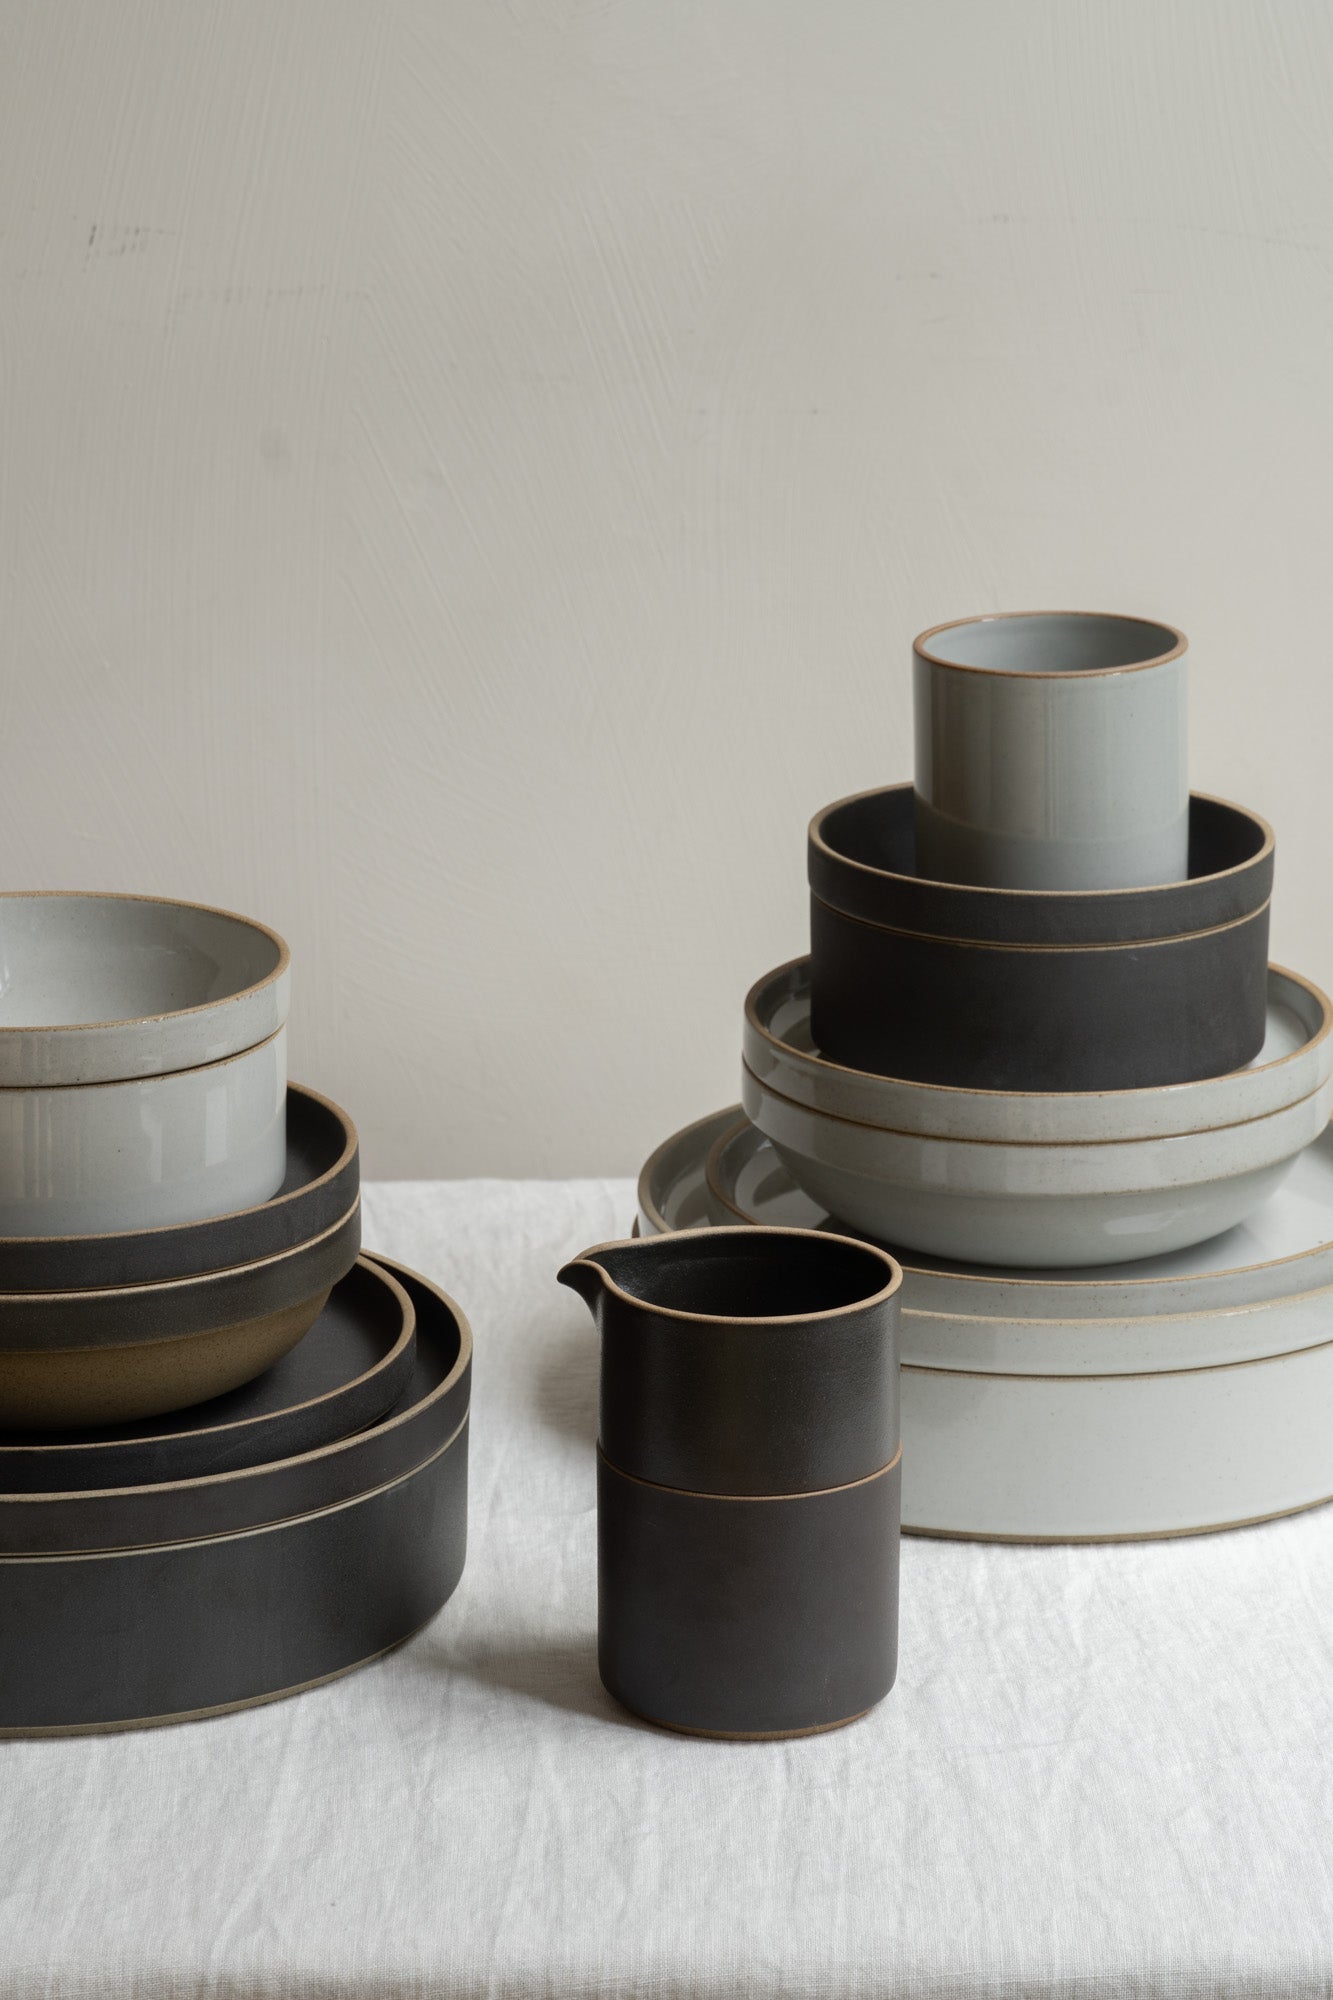 Hasami family all sizes Grey and Black by Hasami Porcelain